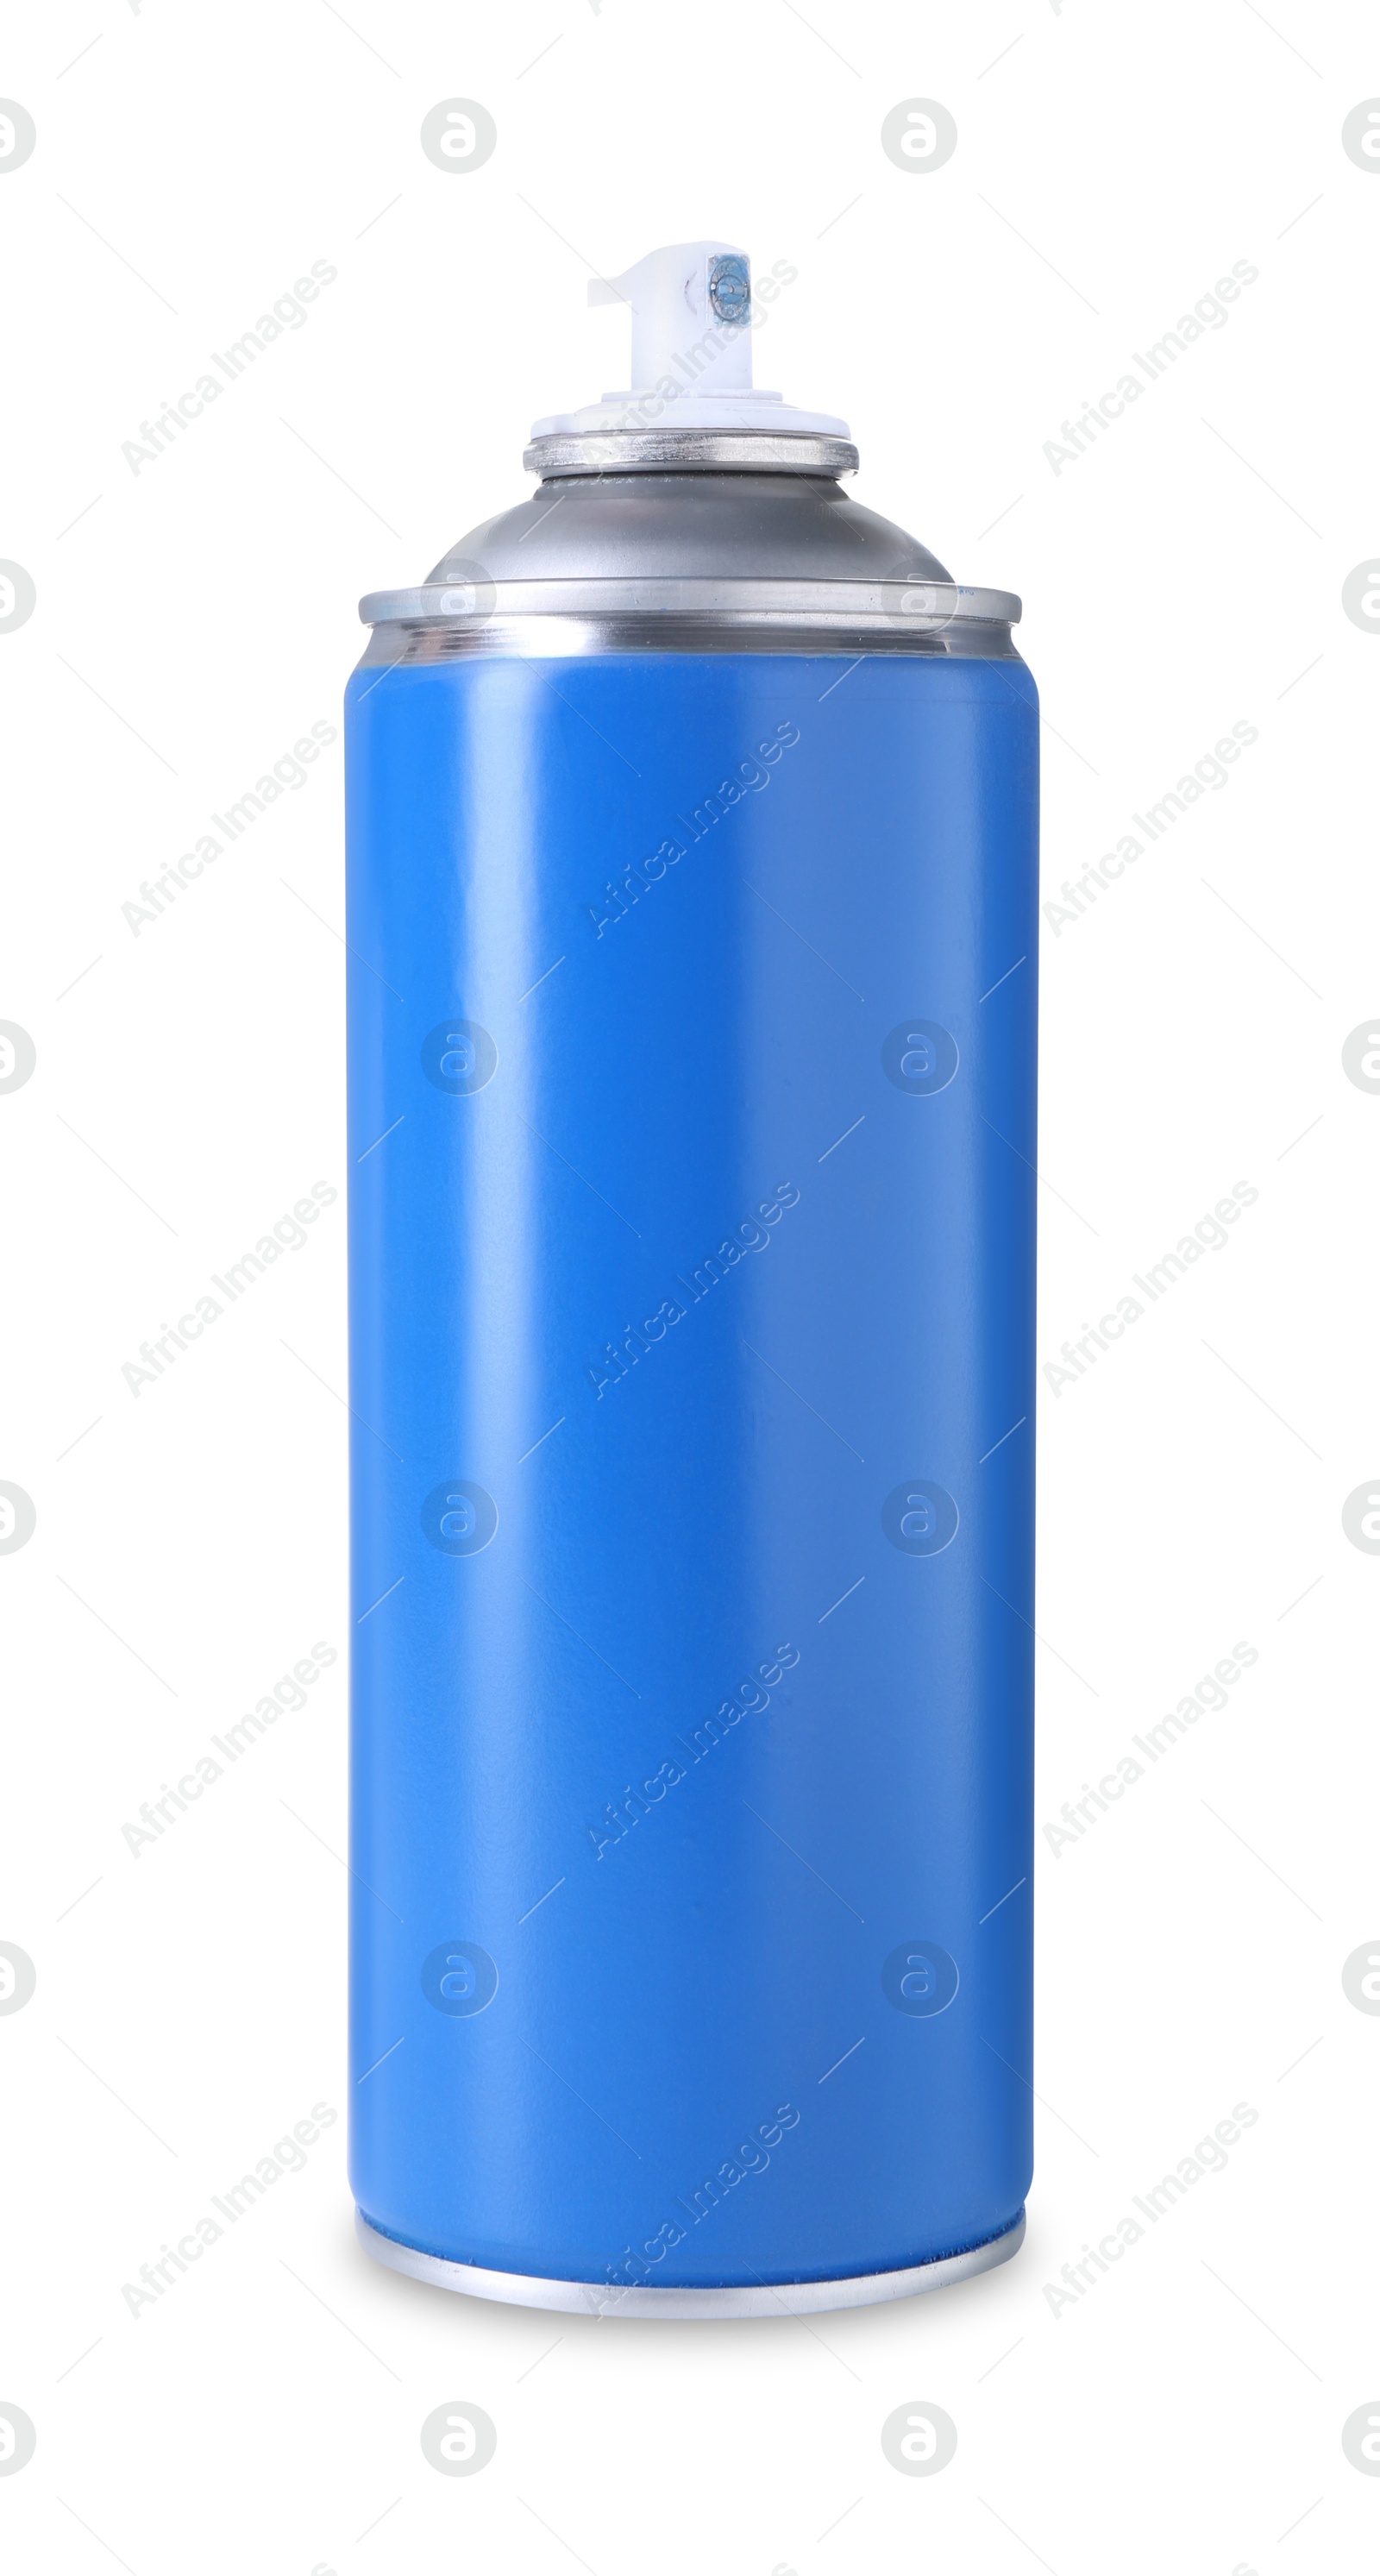 Photo of Blue can of spray paint isolated on white